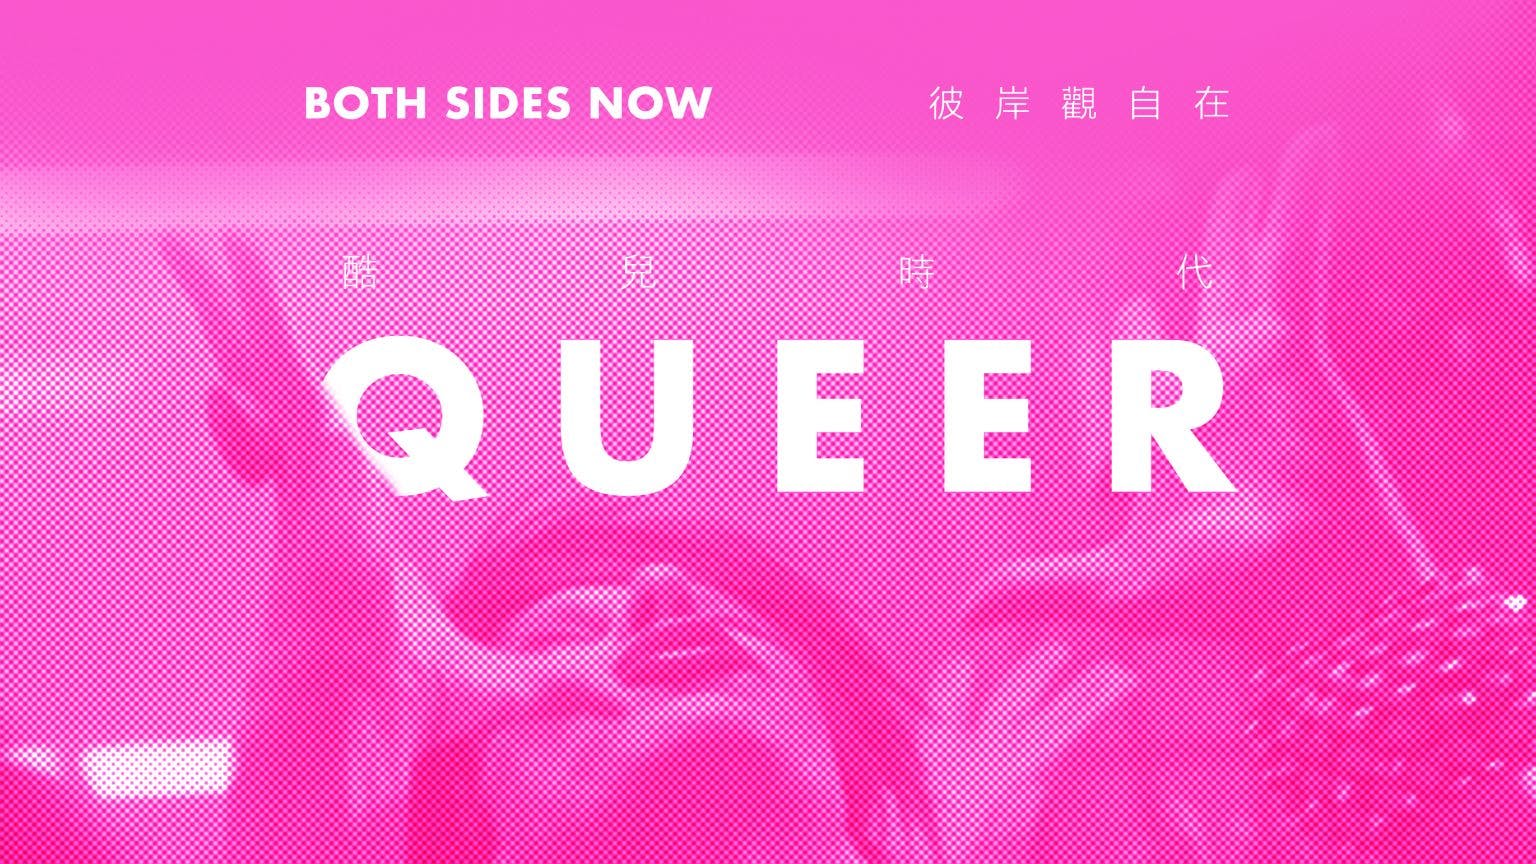 Both Sides Now: Queer@SPARK 2021 彼岸觀自在: 酷兒時代@SPARK 2021